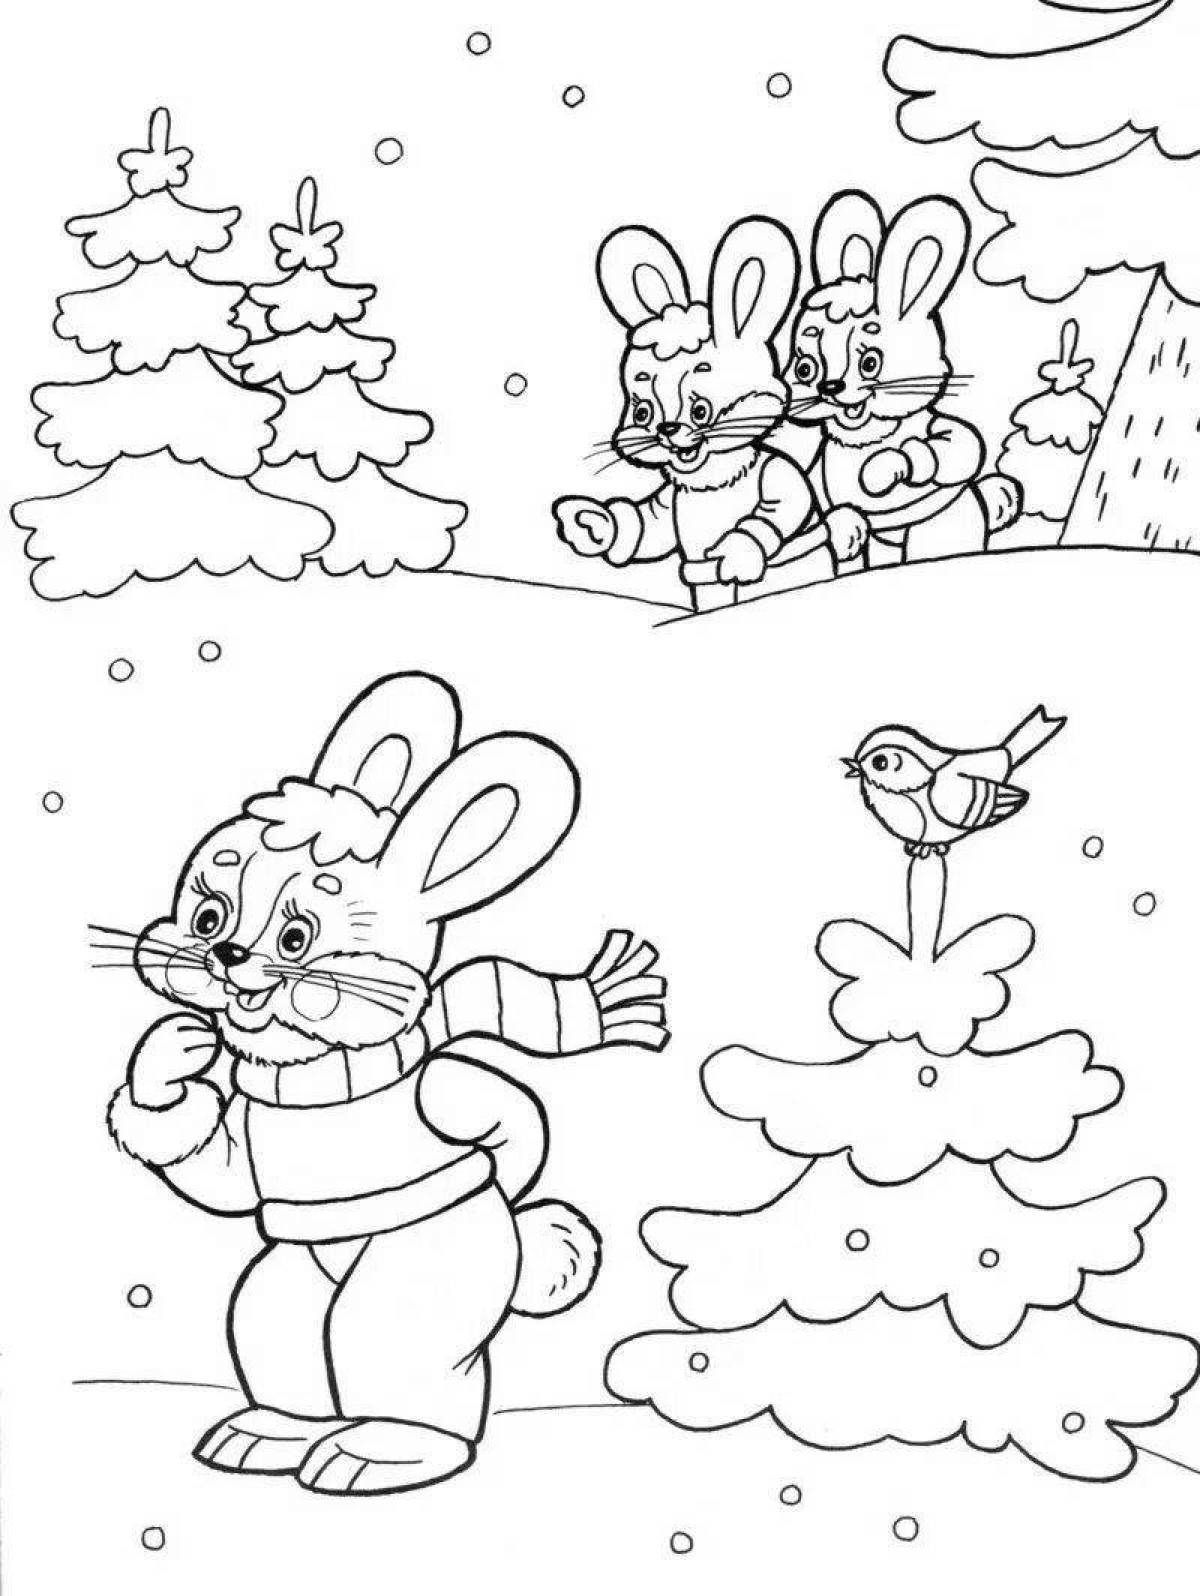 Cute winter animals coloring book for 3-4 year olds